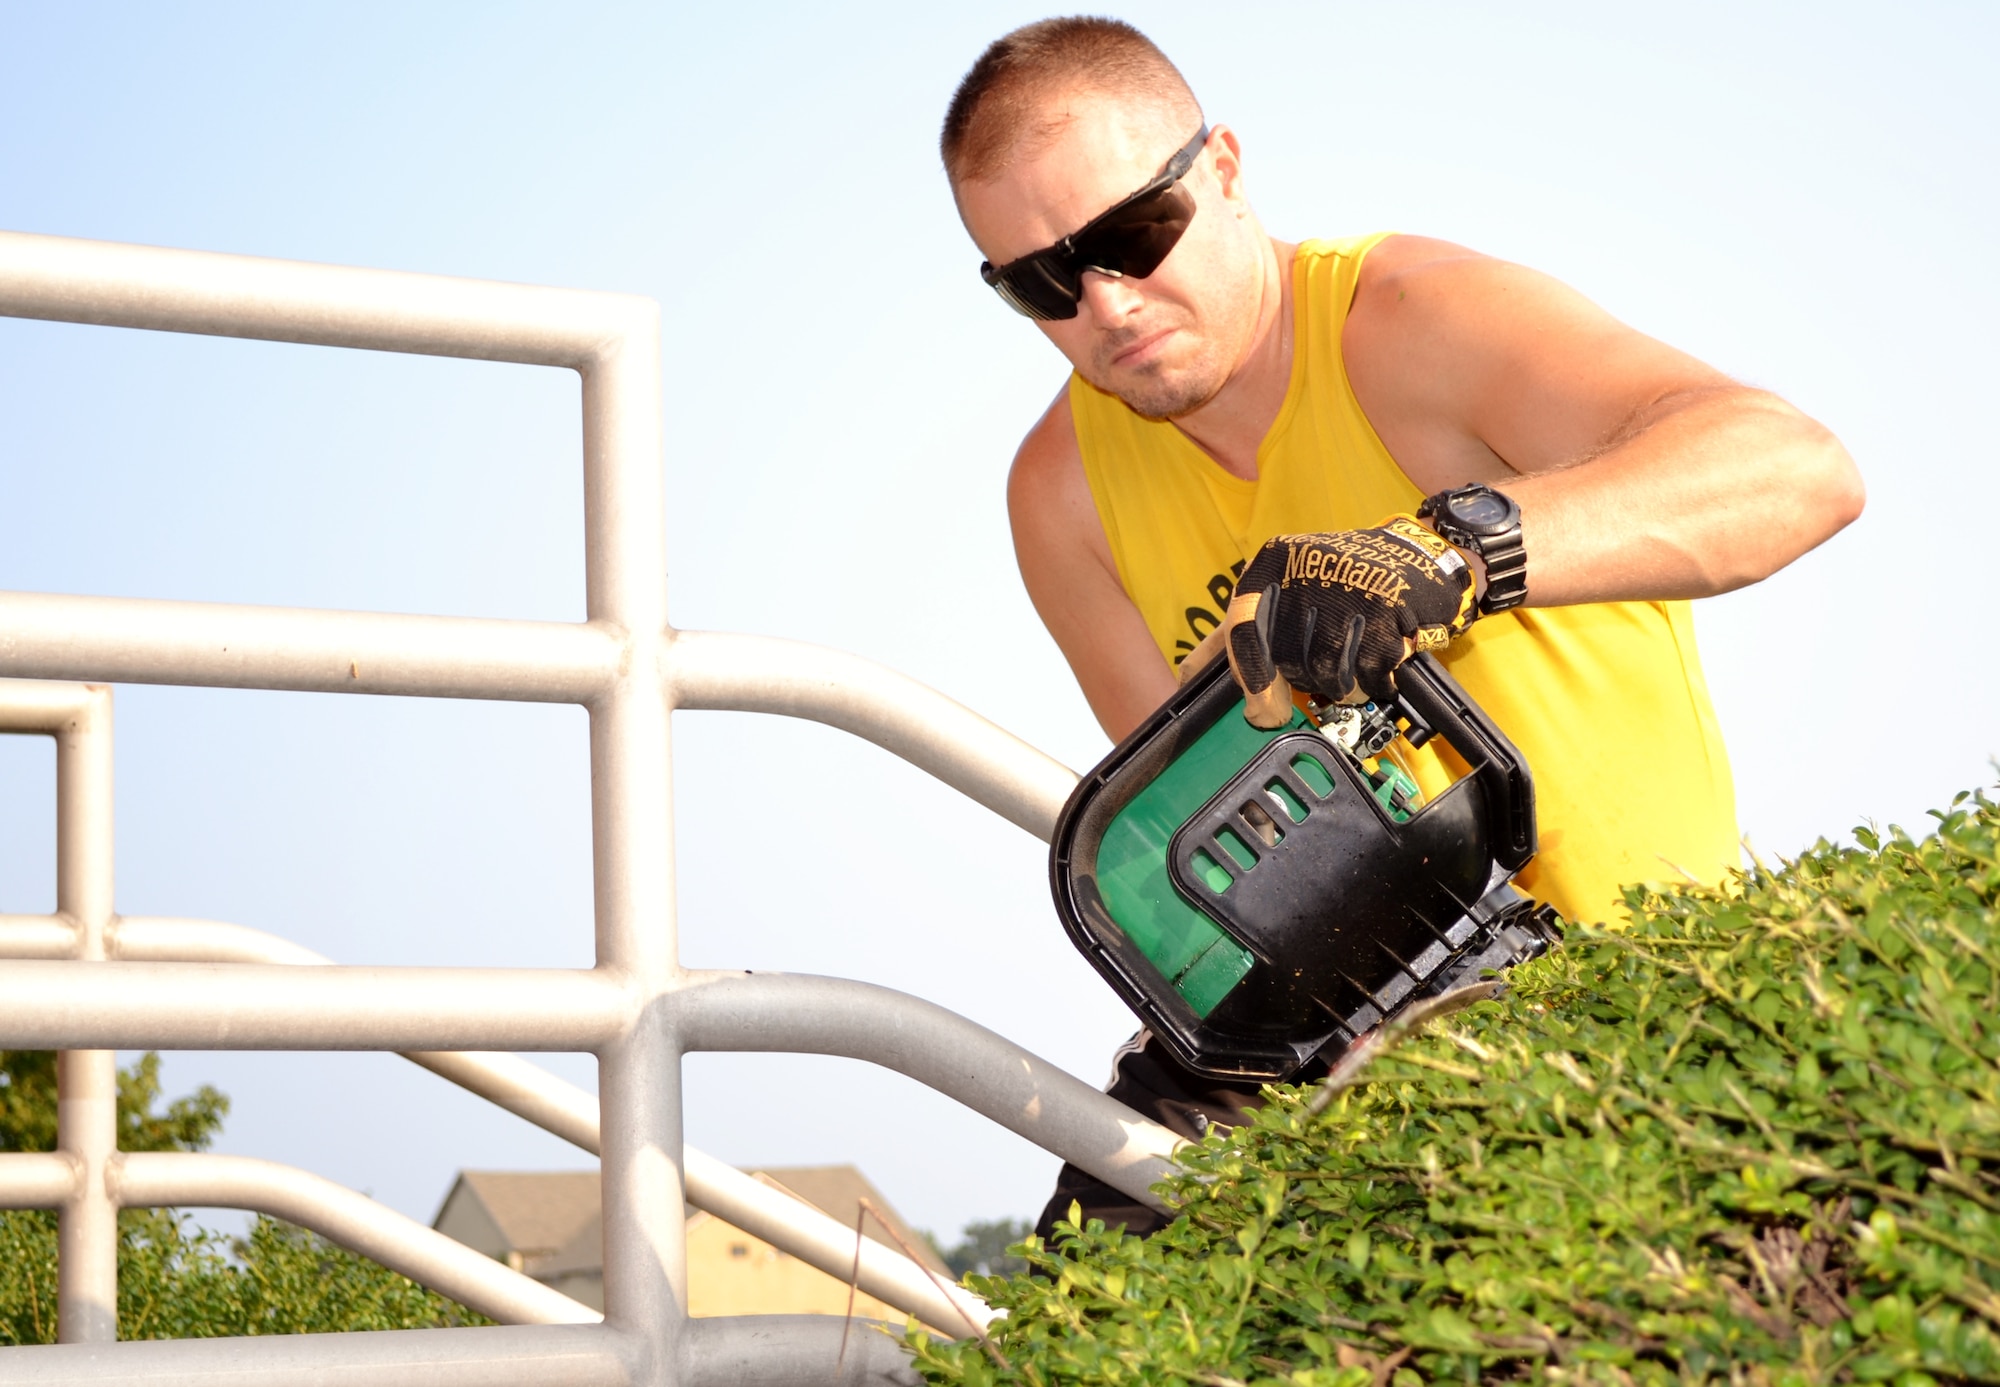 Master Sgt. Kevin Watson, 111th Attack Wing recruiting office supervisor, uses a hedge trimmer to cut back shrubs that surround the Wing’s headquarters building, Aug. 4, 2015, Horsham Air Guard Station, Pennsylvania. Watson used his landscaping skills during the wing’s clean-up day. (U.S. Air National Guard photo by Tech. Sgt. Andria Allmond/Released)